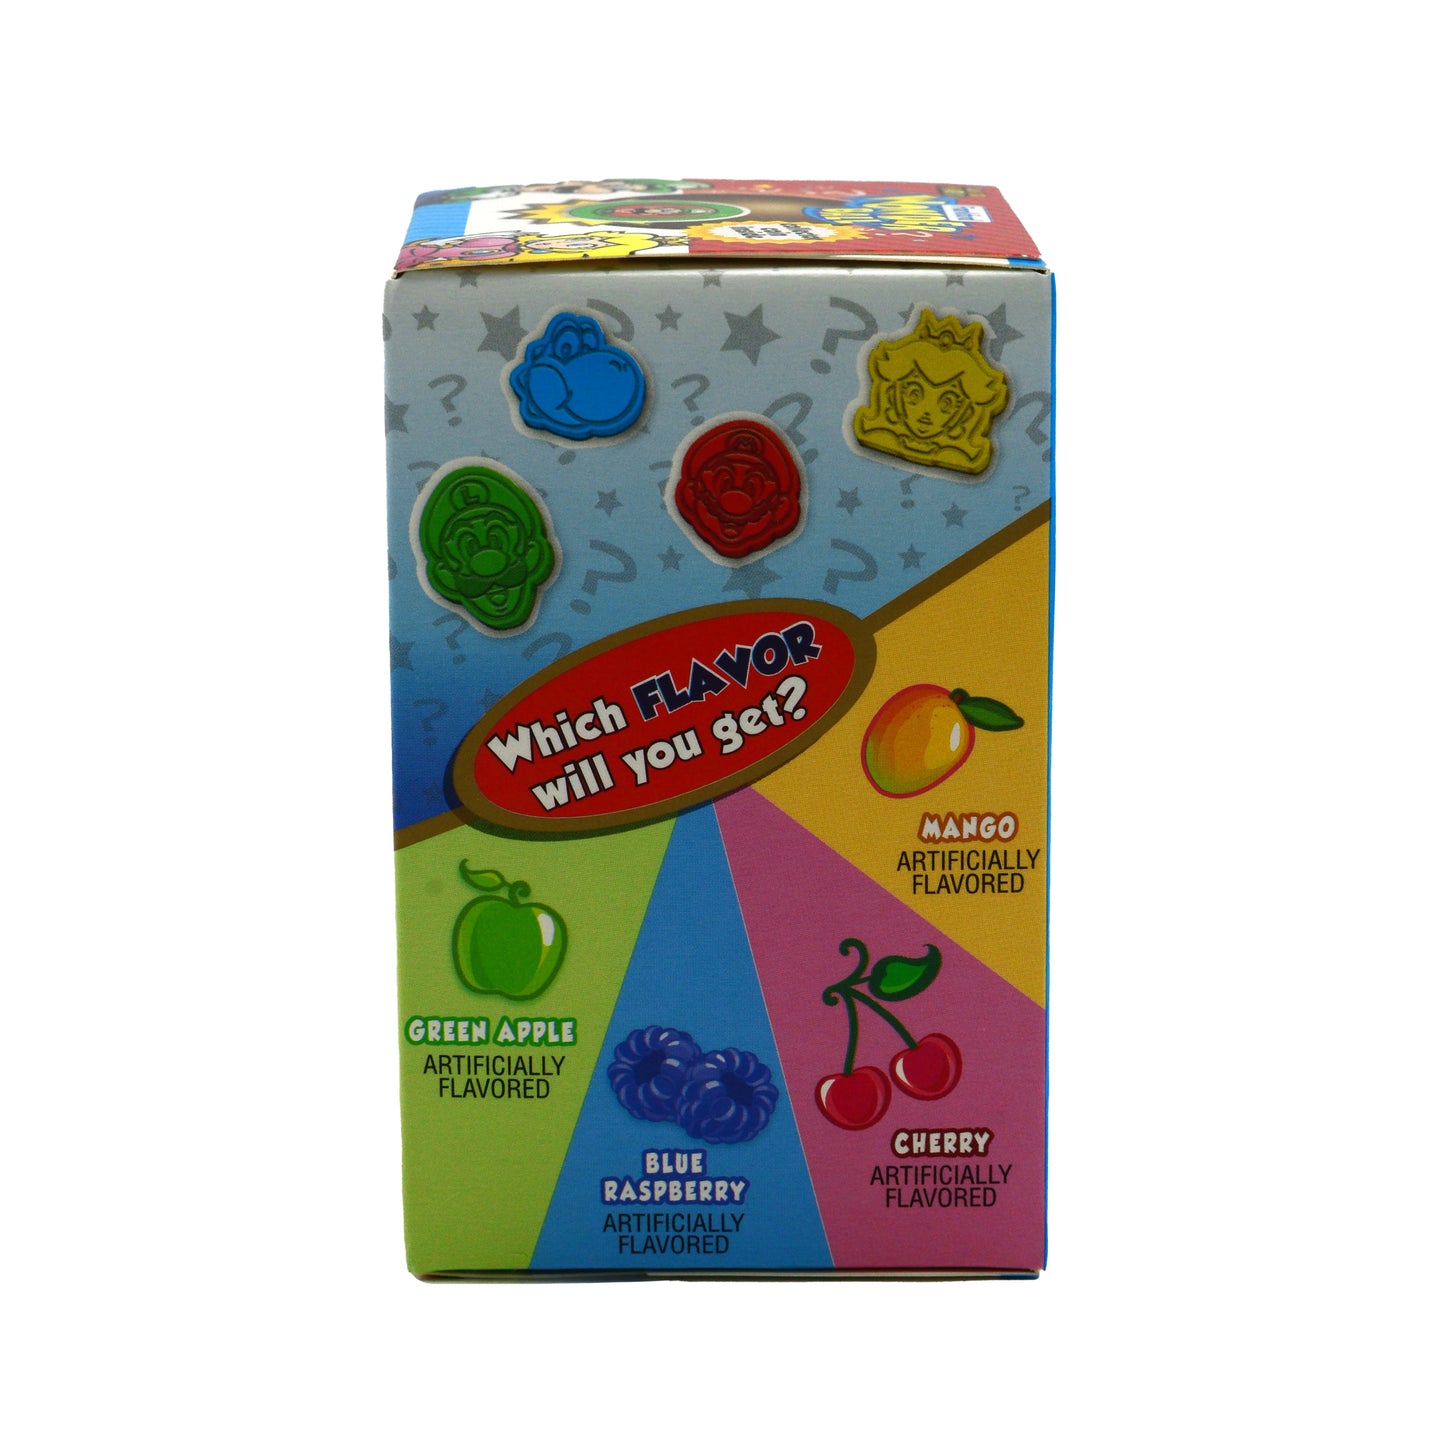 Side of wonderball box with different gummy flavor options